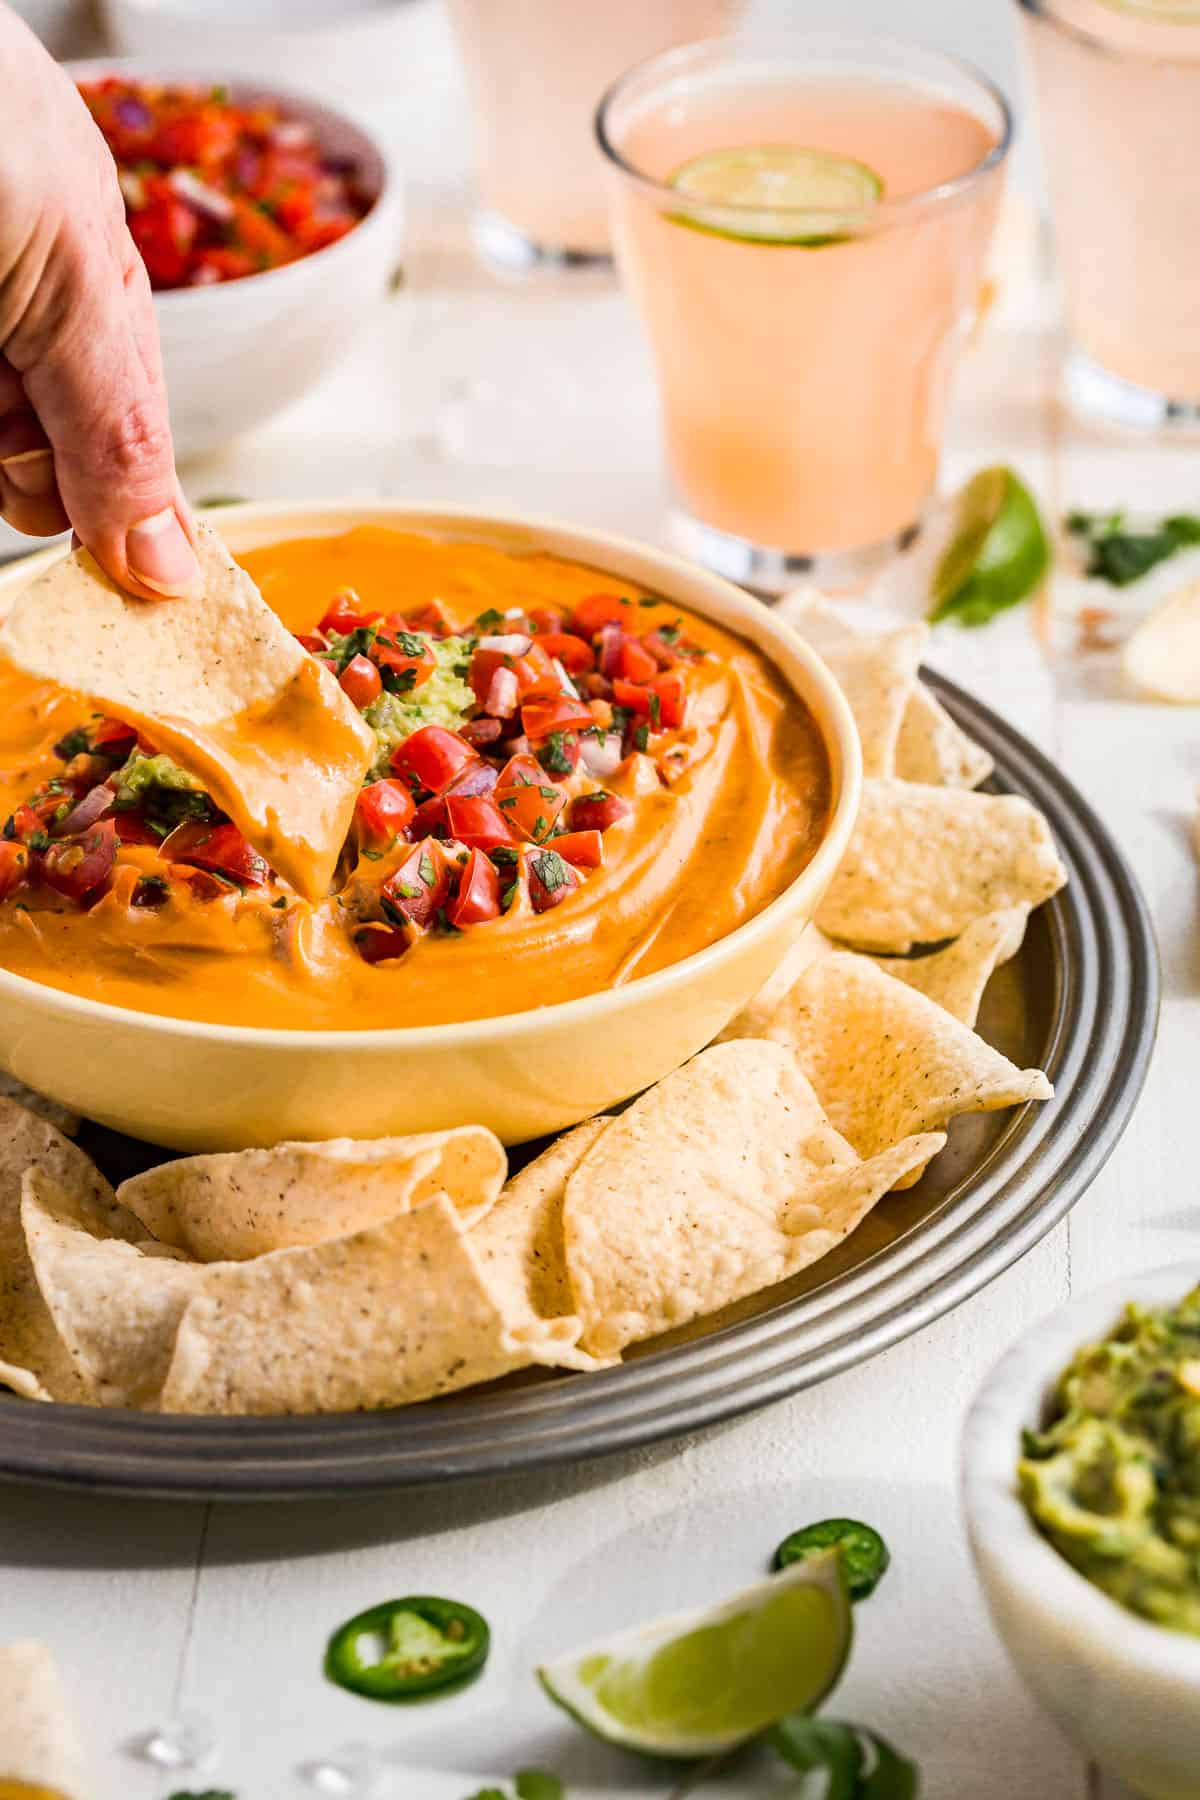 A hand dipping a chip into the bowl of queso with drinks in the background.